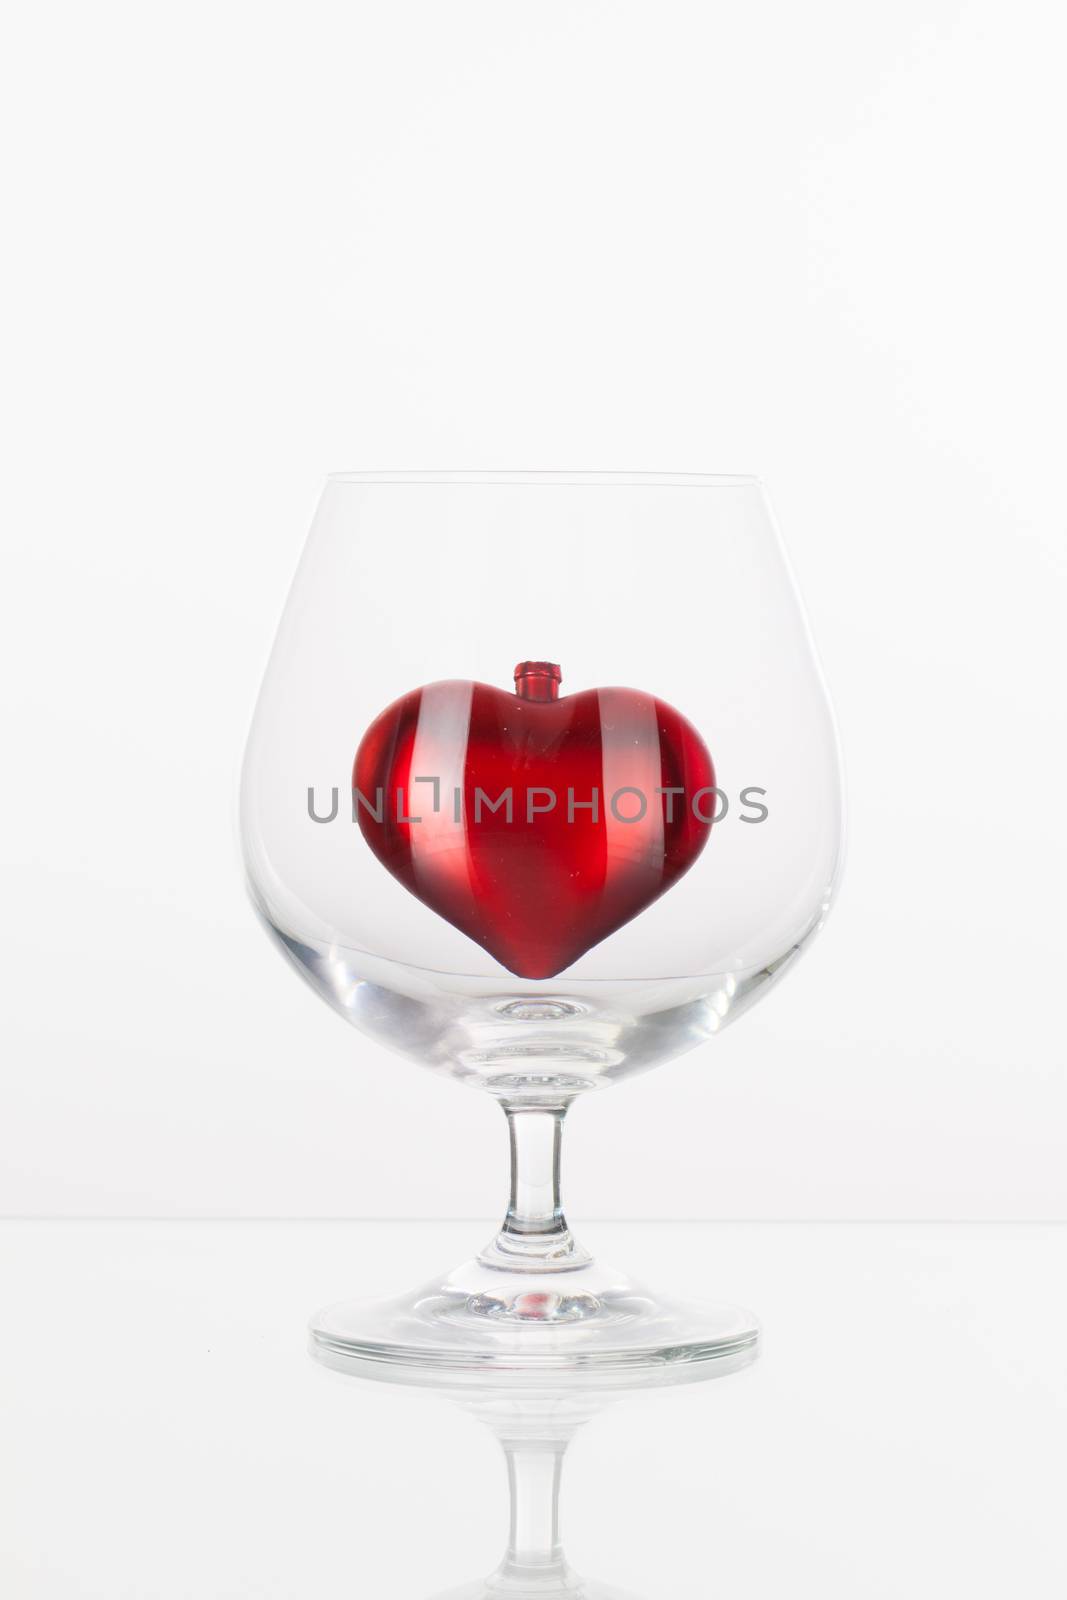 Red heart inside a glass of cognac on a glass plate